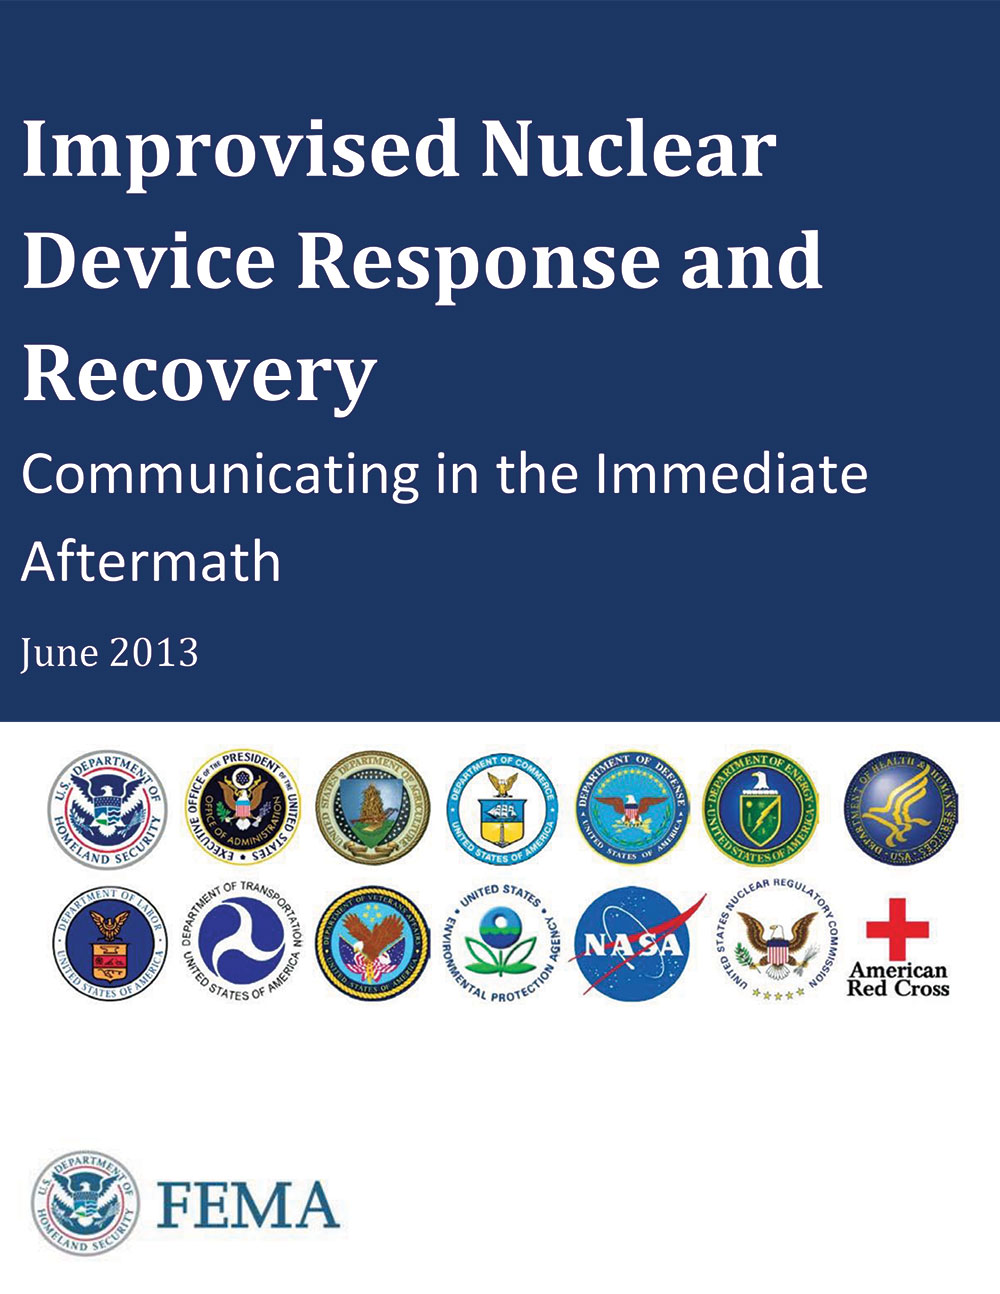 FEMA’s Improvised Nuclear Device Response and Recovery, report cover